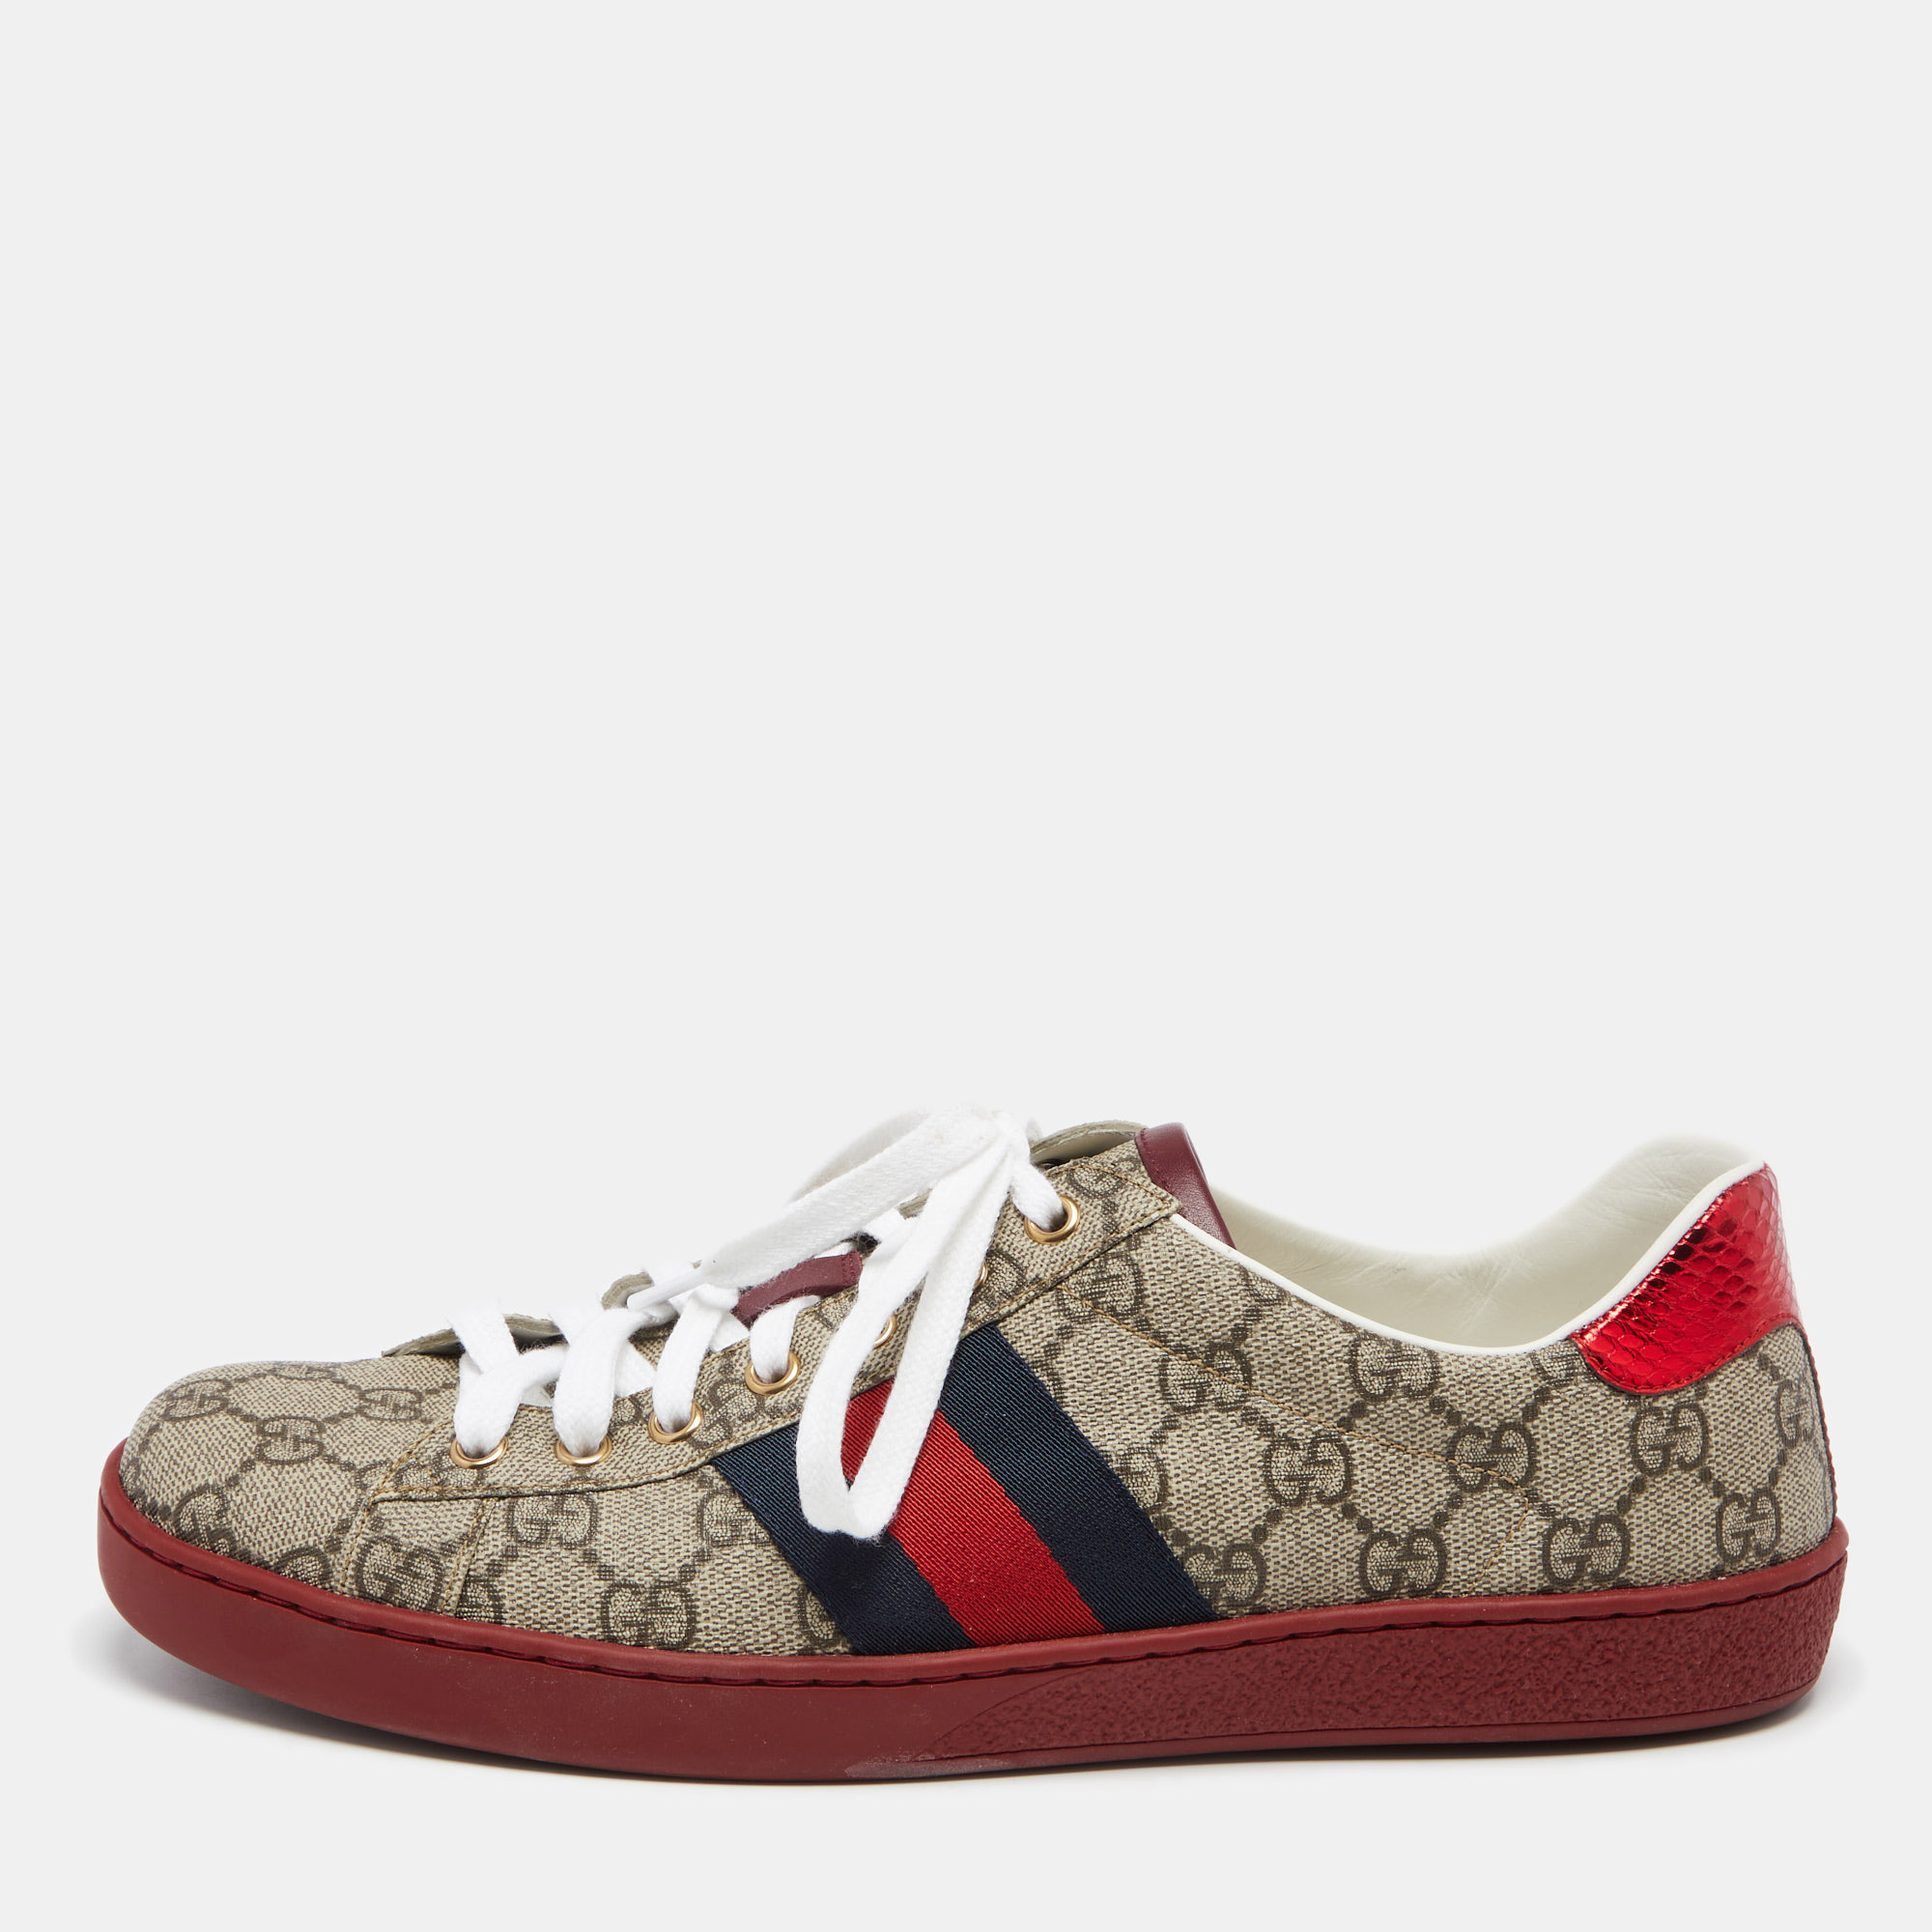 Pre-owned Gucci Multicolor Gg Supreme Canvas Ace Web Low Top Sneakers Size 42.5